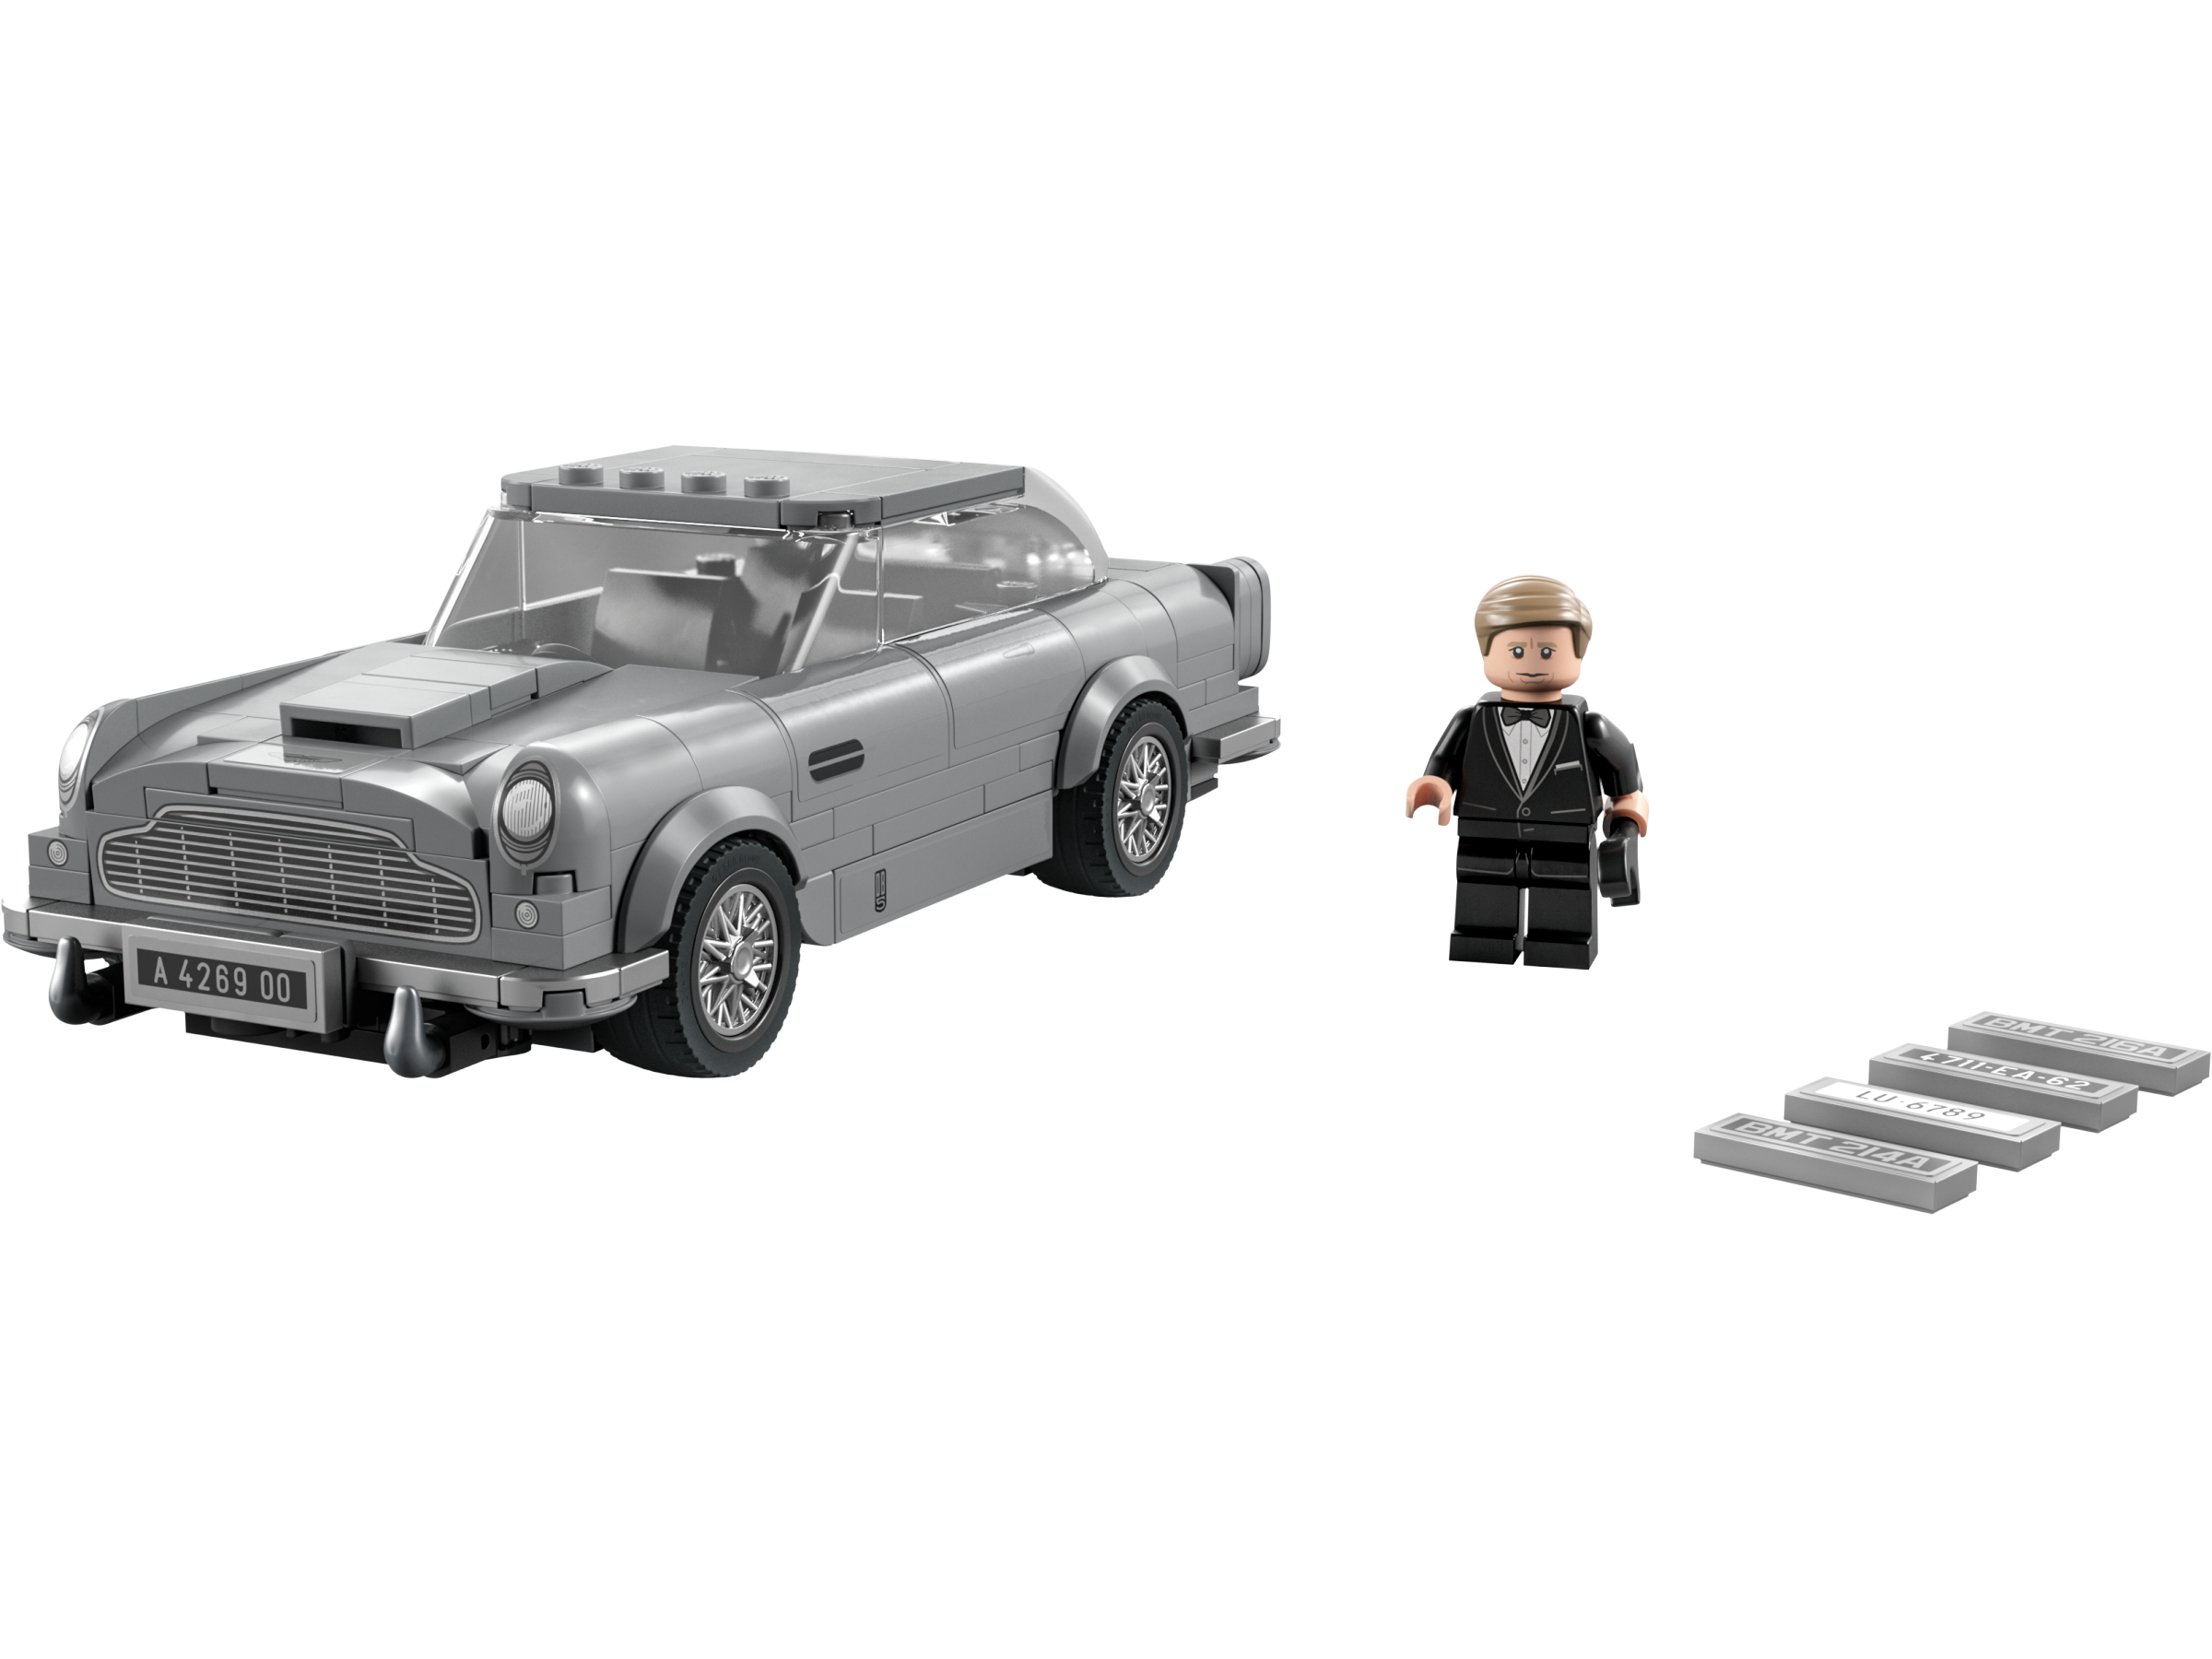 LEGO Speed Champions summer 2022 sets officially revealed